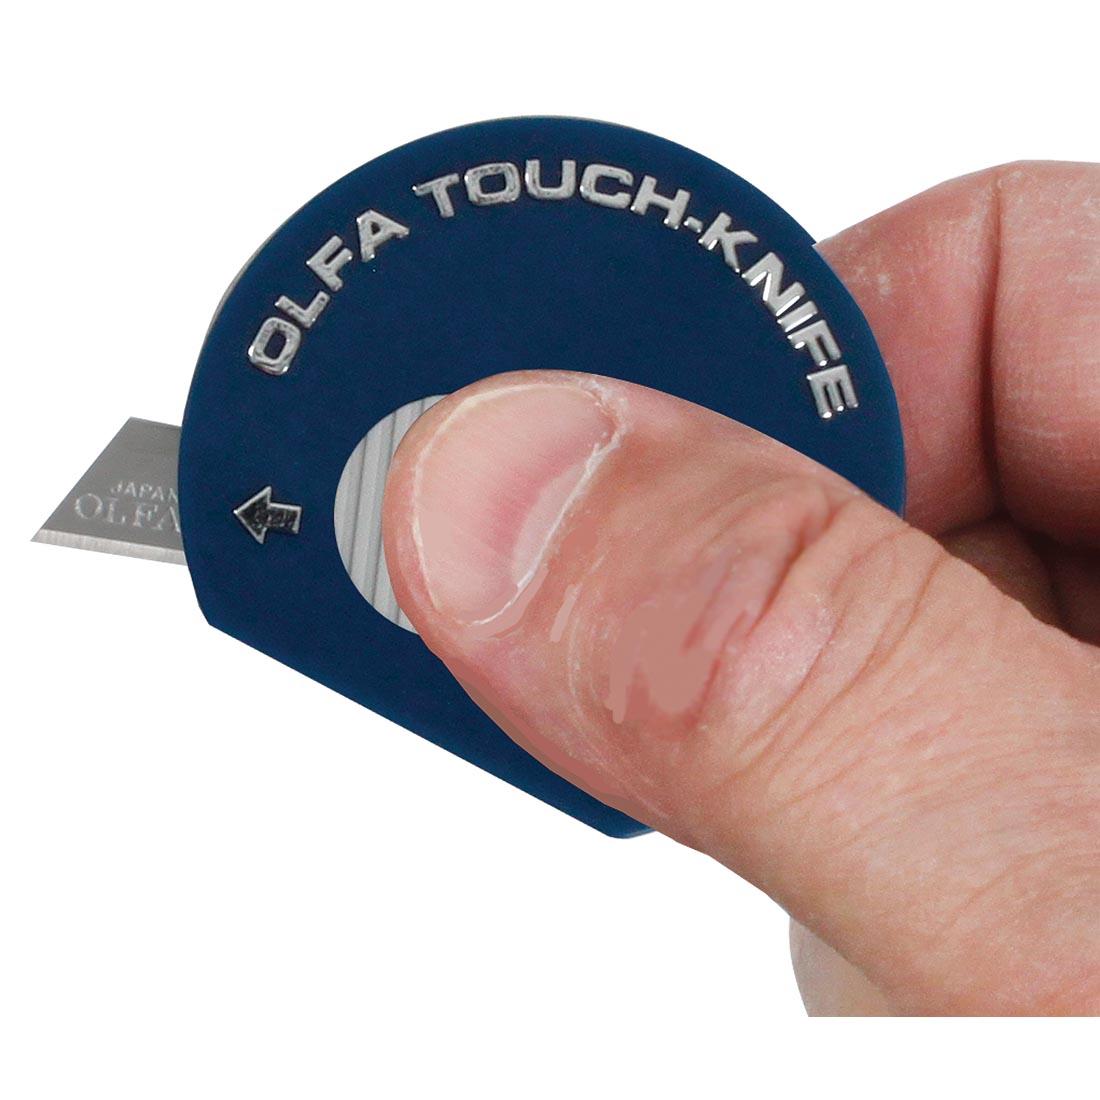 Olfa touch knife in user's hand, with knife blade exposed